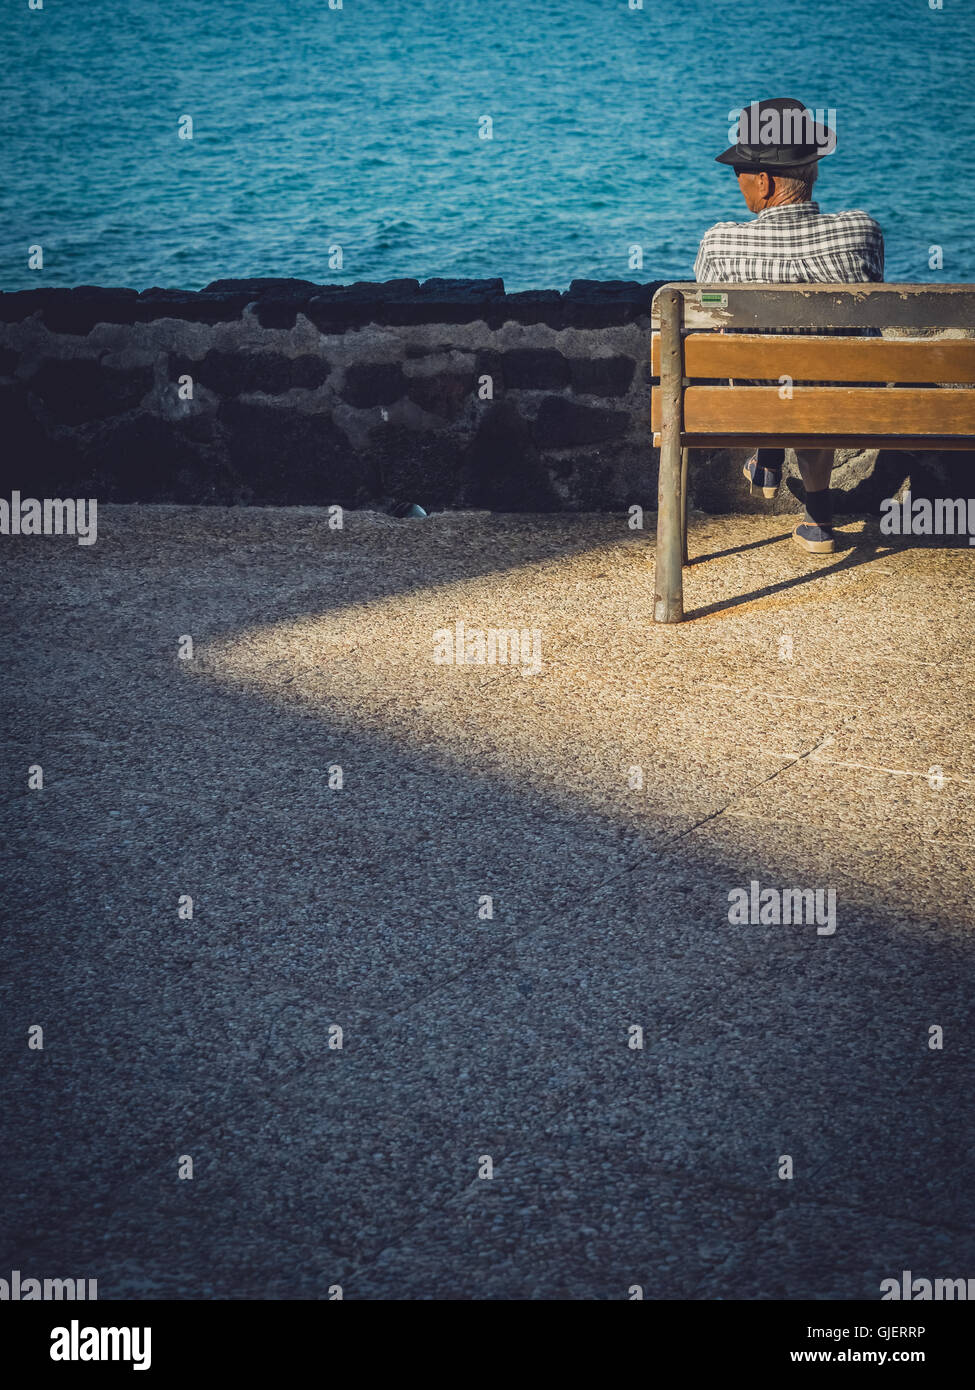 Old Lonely Man Sitting Alone On A Wooden Bench On A Seaside Promenade Stock Photo Alamy